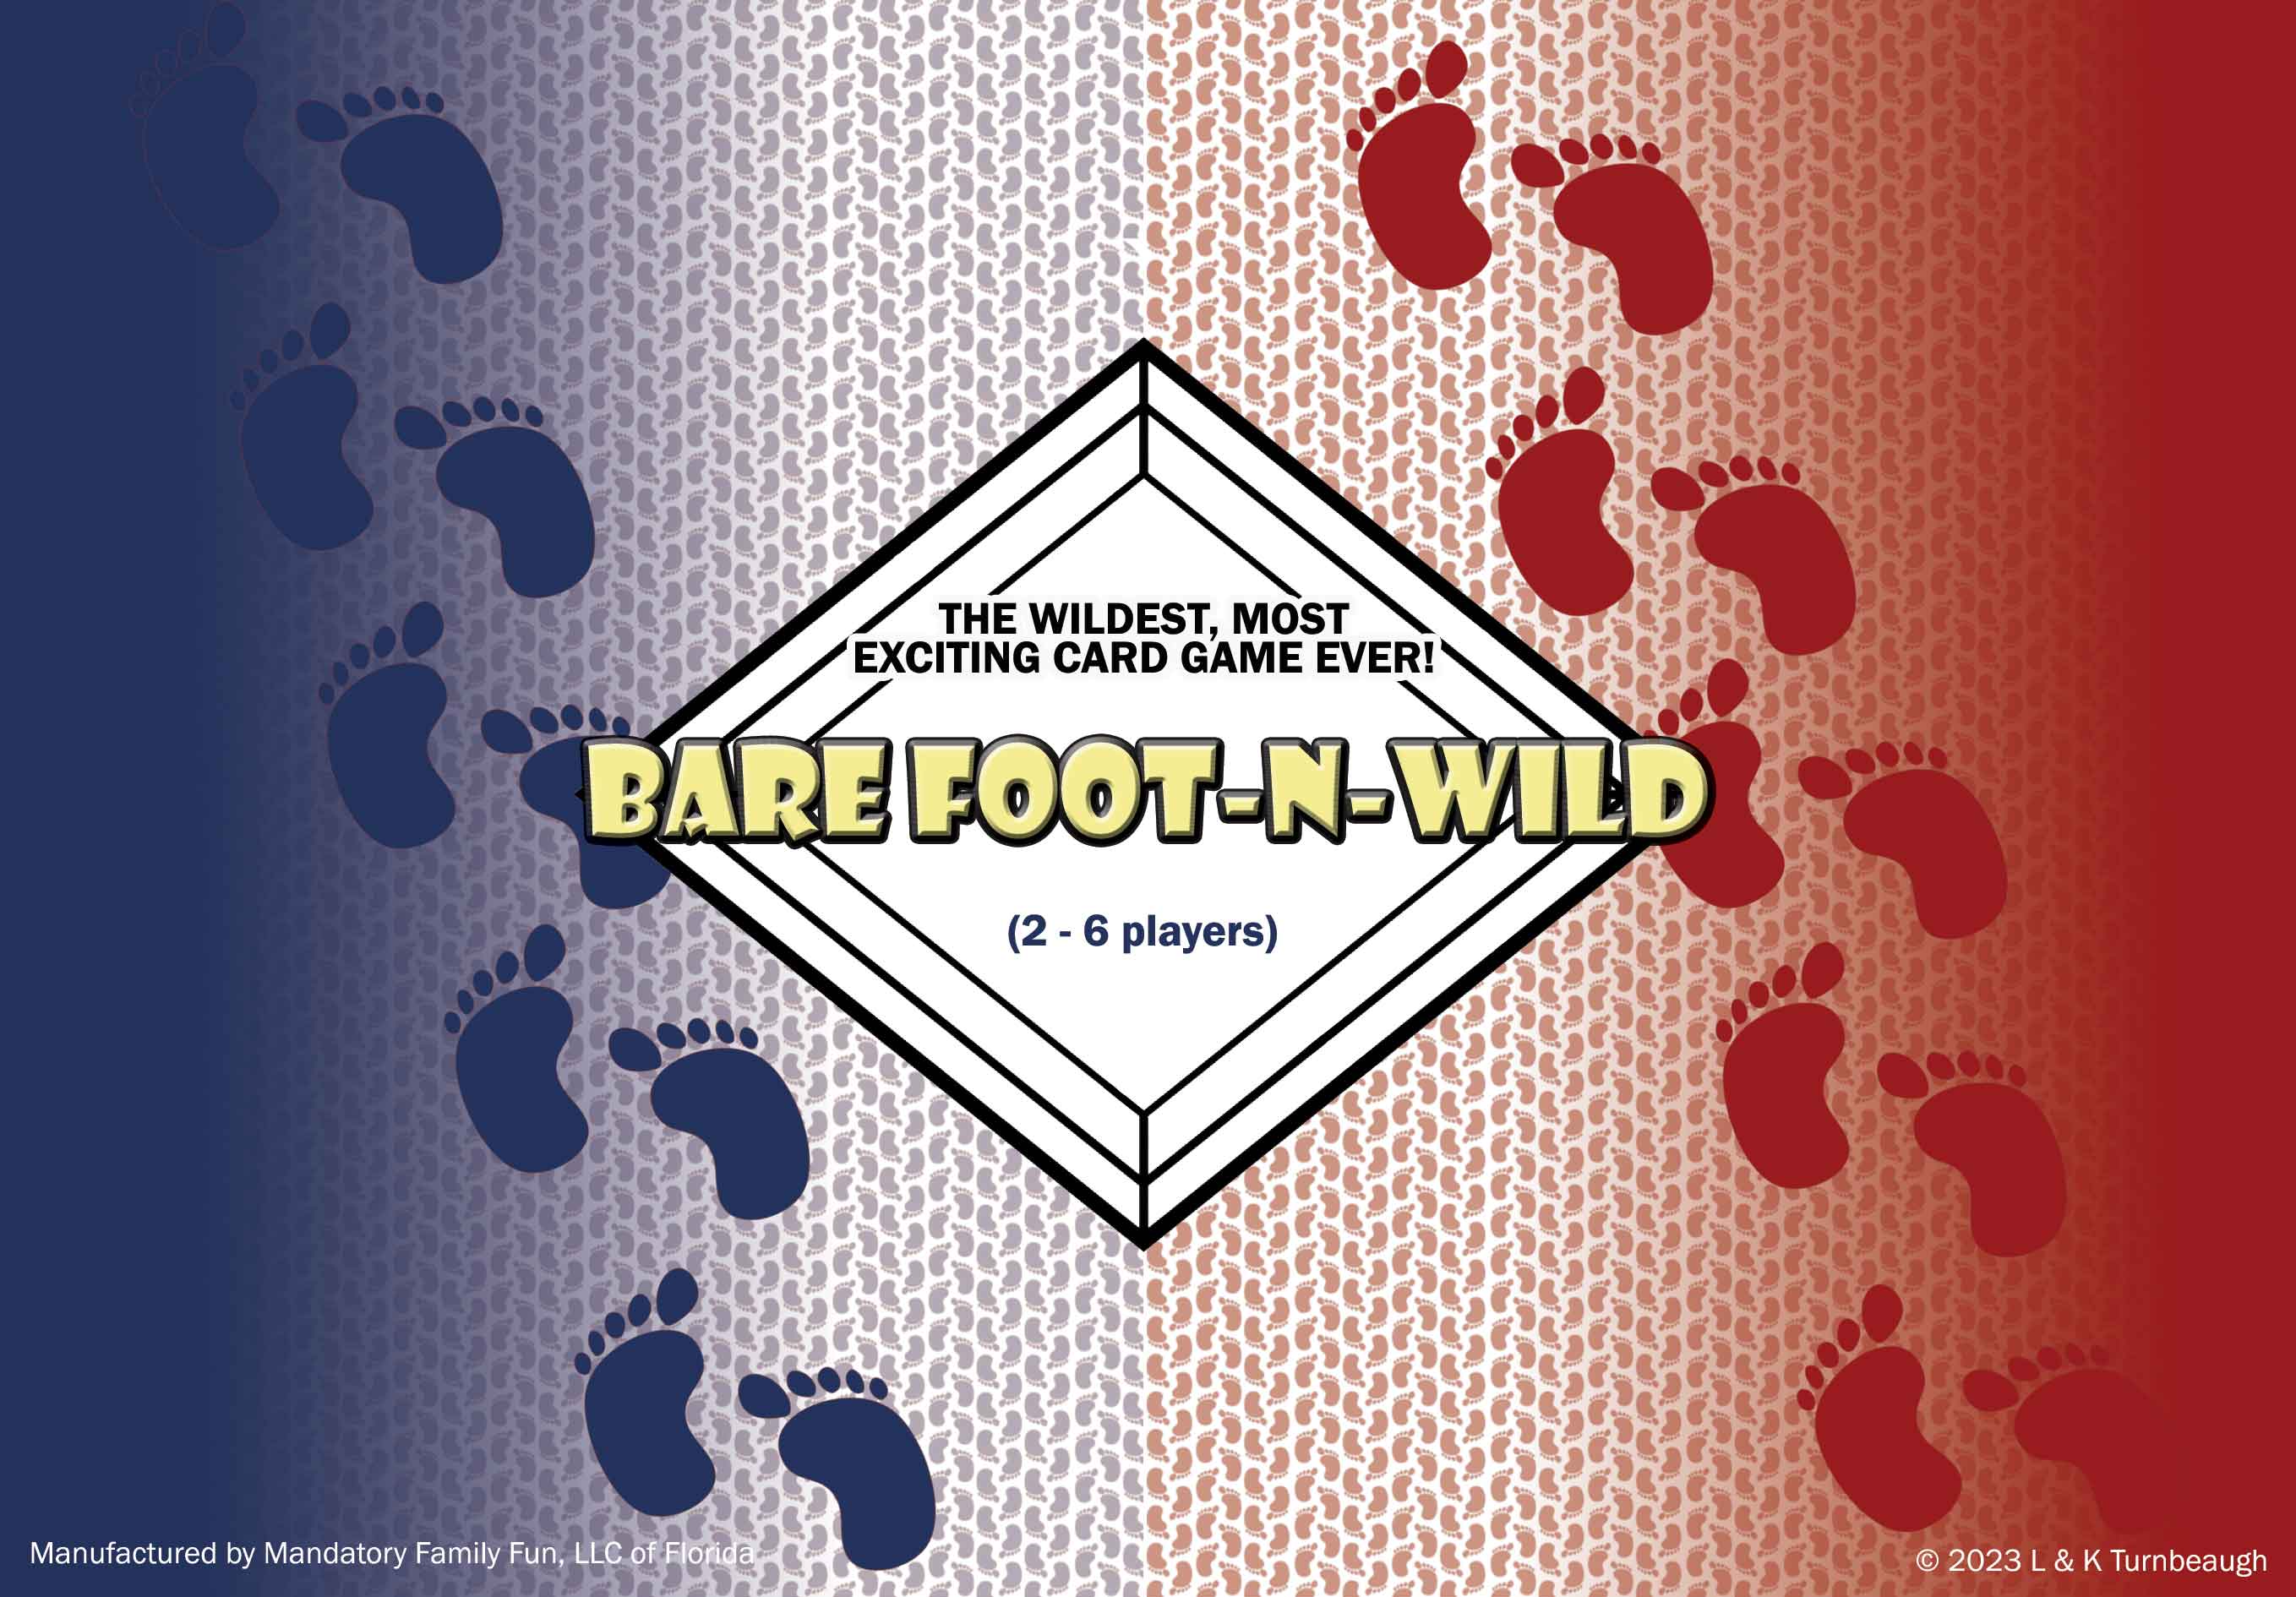 Bare Foot -N- Wild Card Game